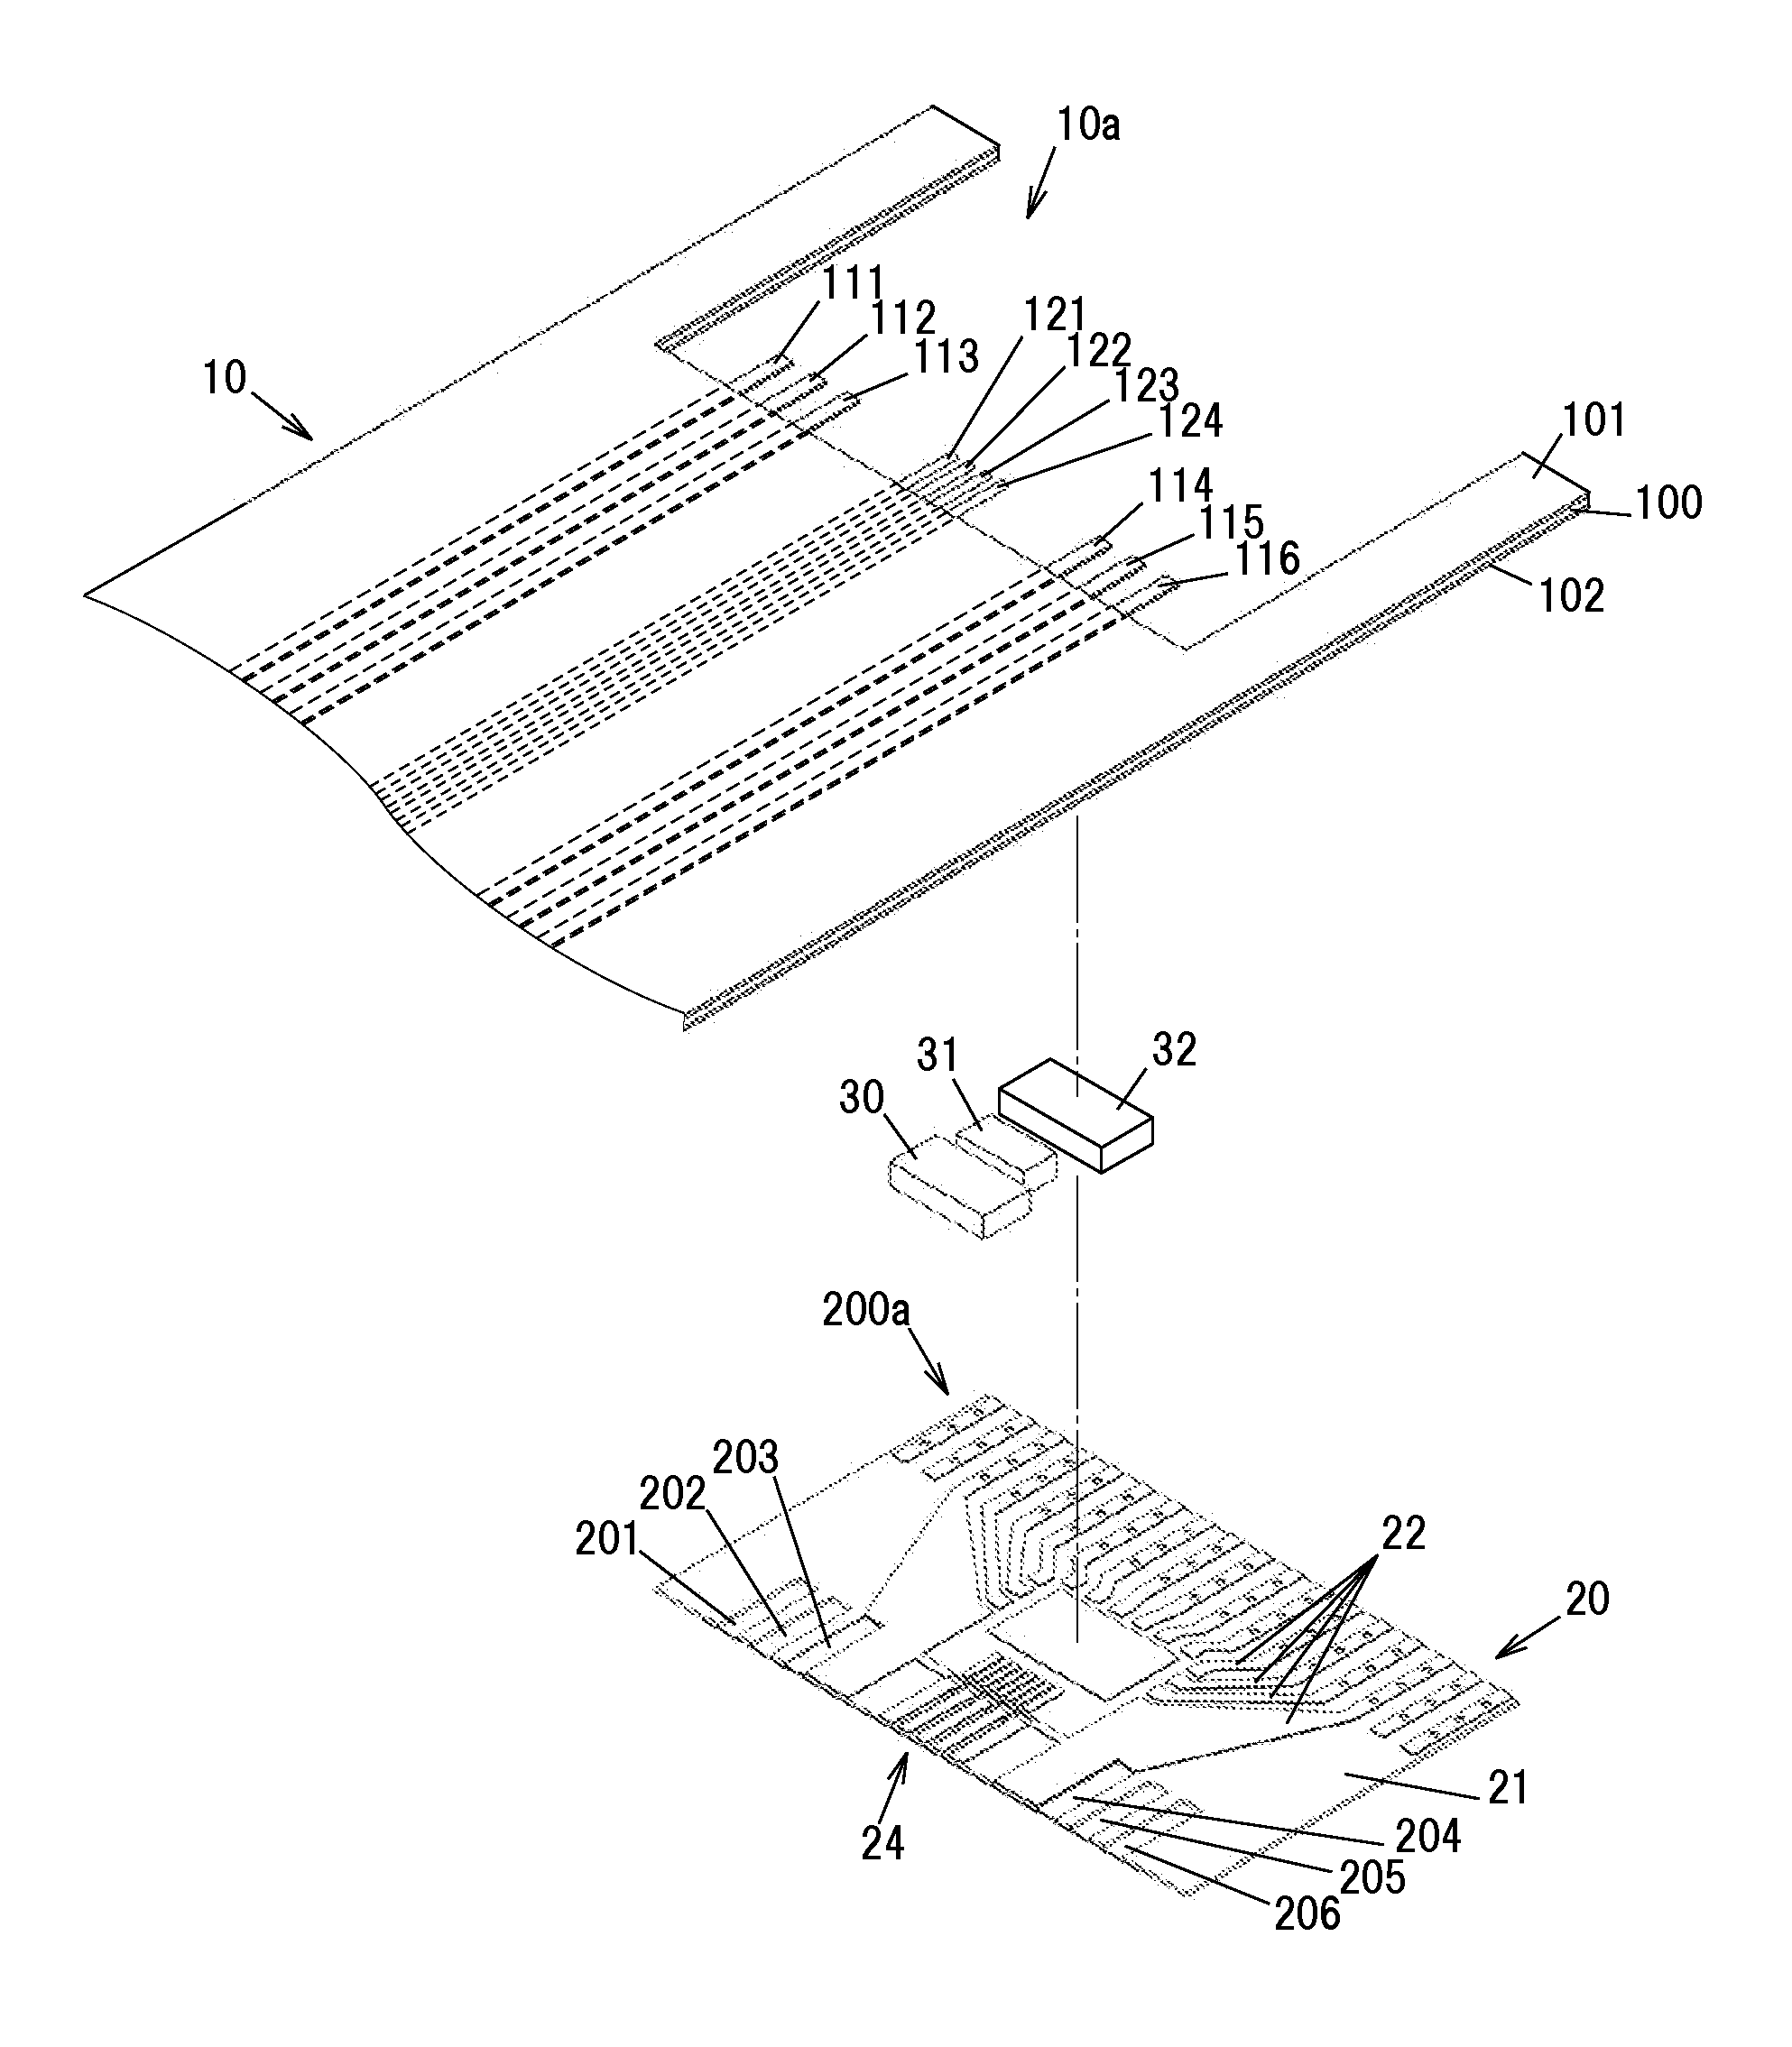 Photoelectric composite wiring module